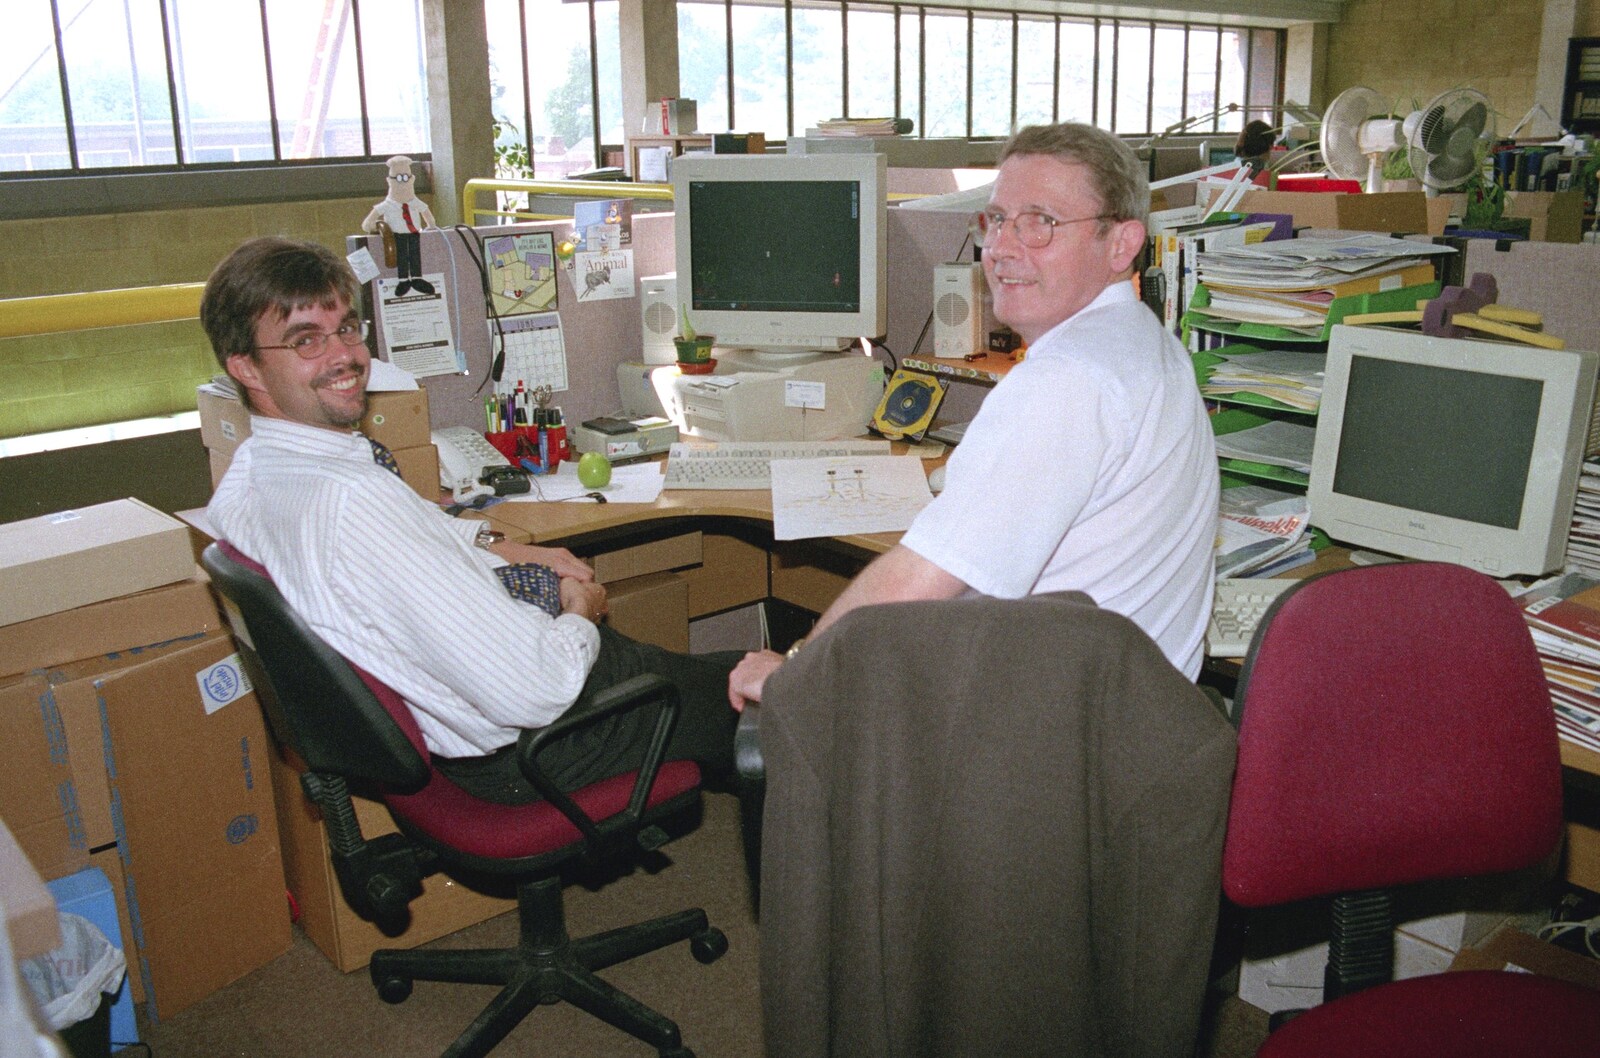 A Last Few Days at CISU, Suffolk County Council, Ipswich - 11th June 2000: Dan 'Parrot' Polley and the head of networks